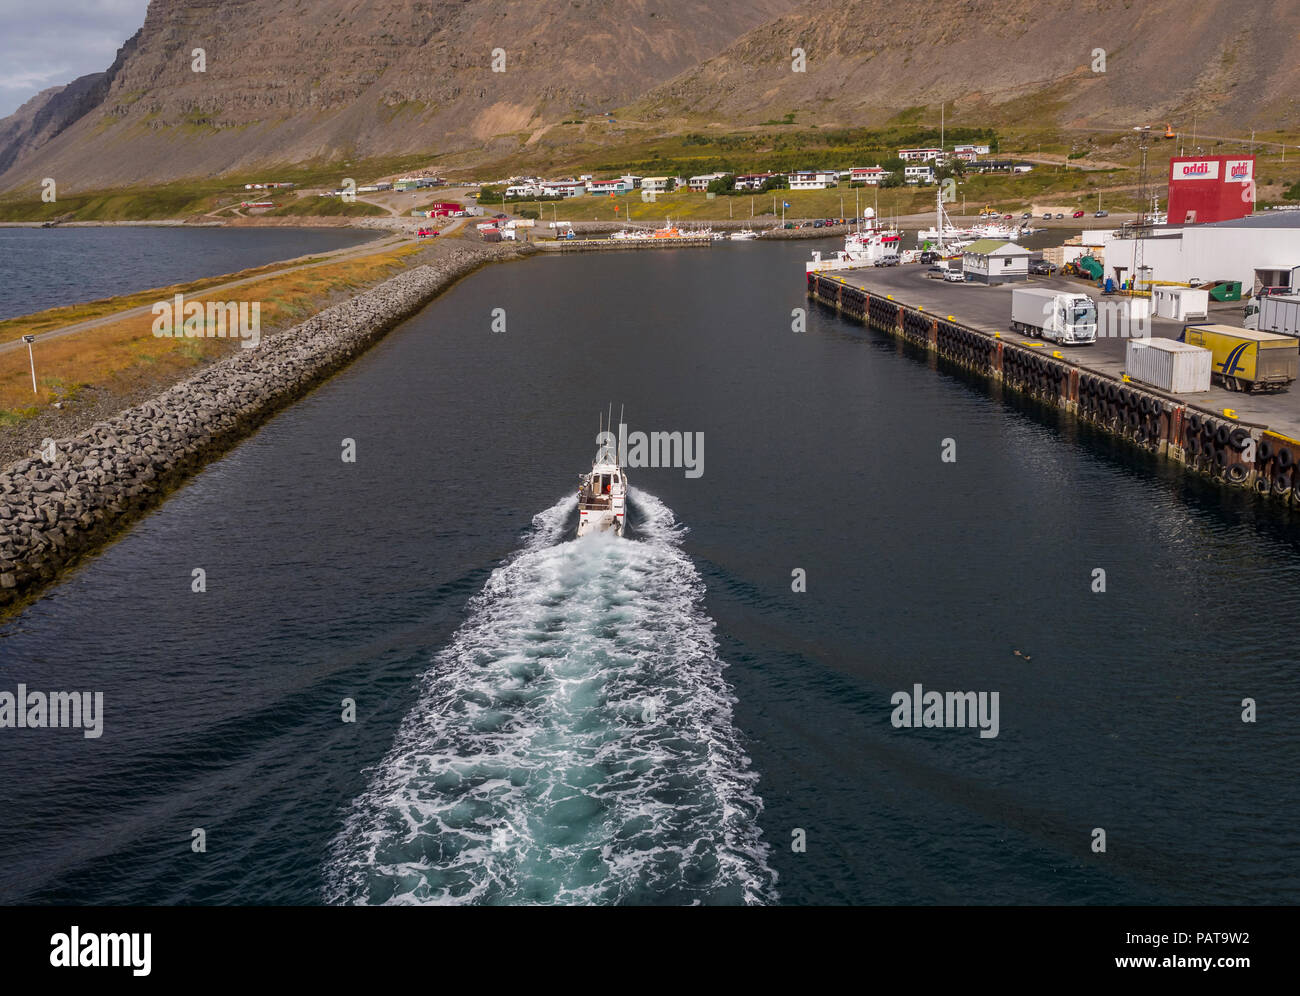 Fishing Boat, Harbor, Patreksfjordur, West Fjords. This image is shot using a drone. Stock Photo